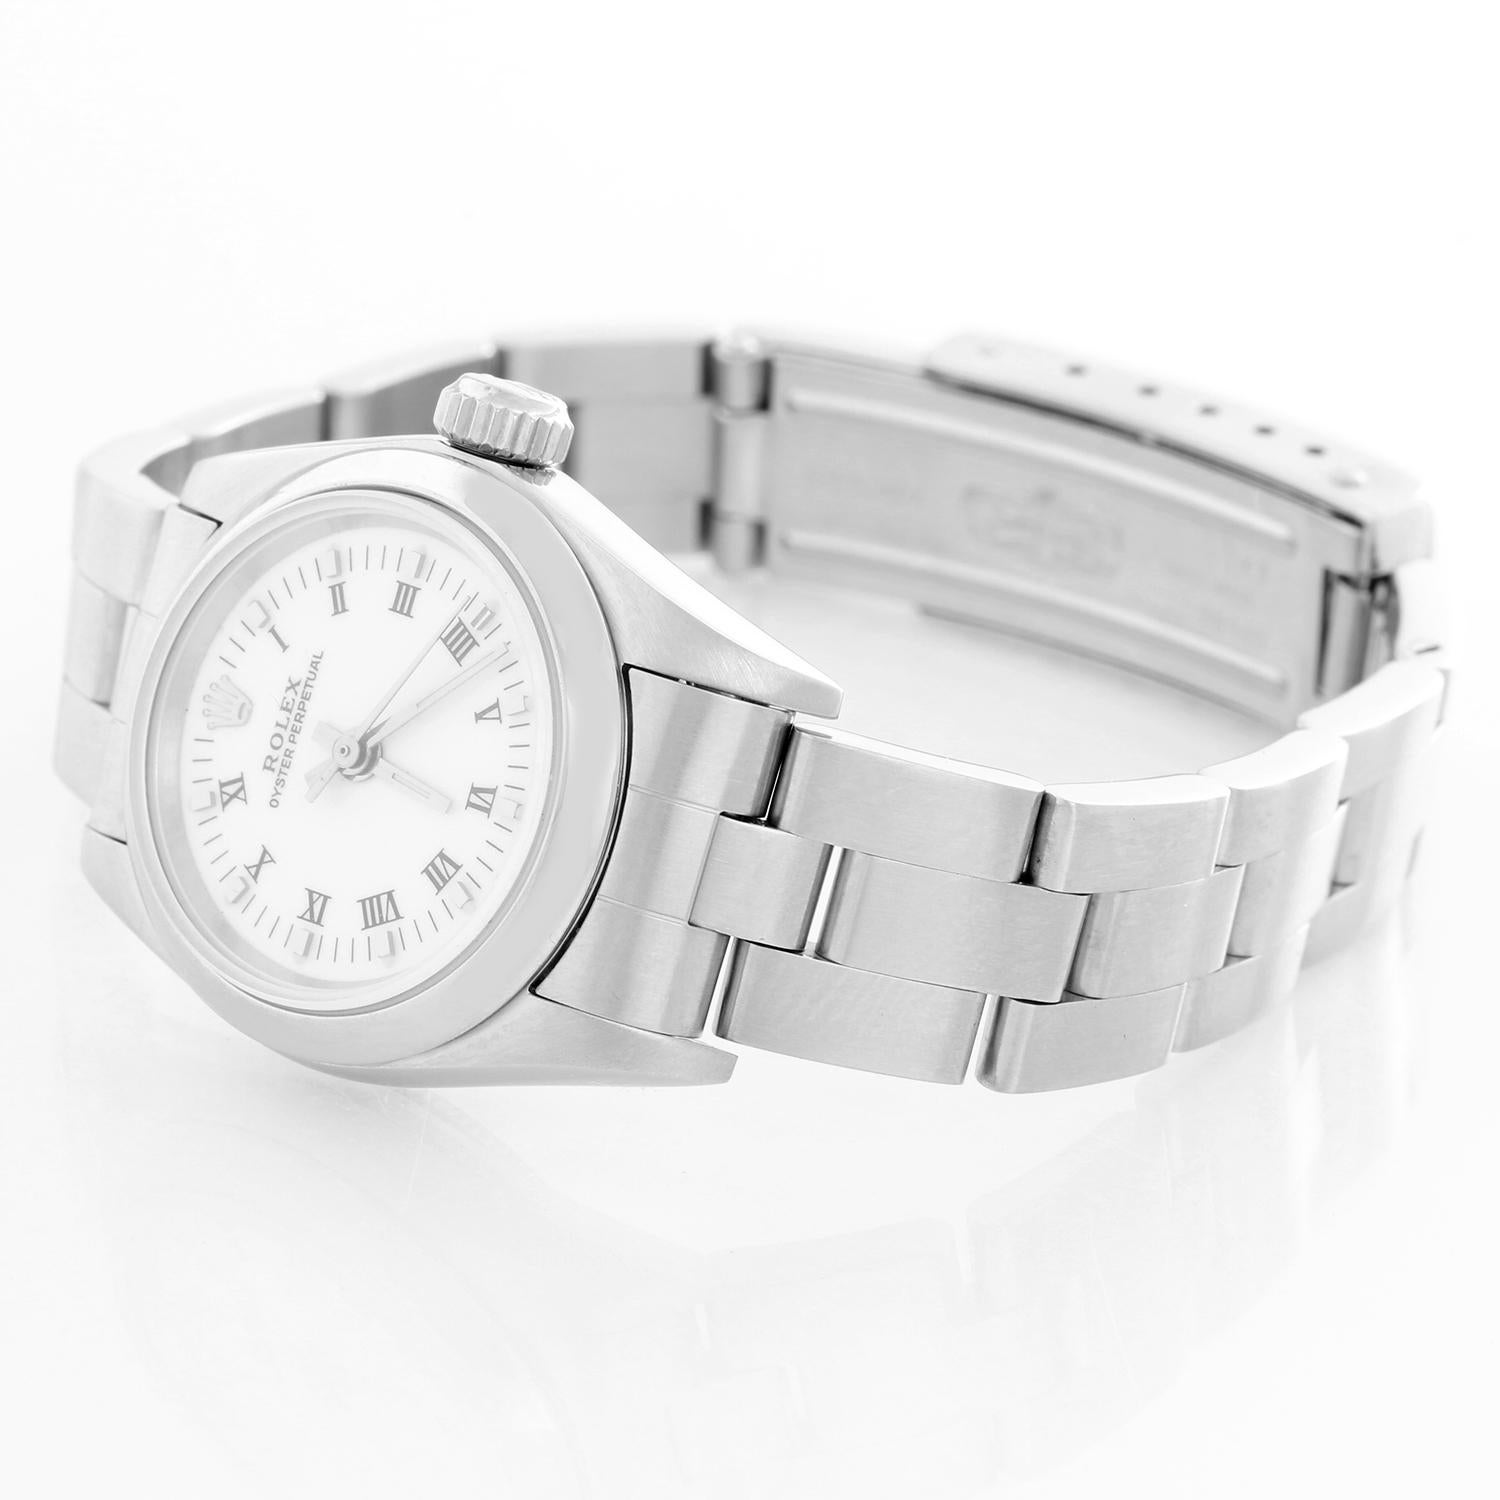 Rolex Ladies Oyster Perpetual No-Date Stainless Steel Watch 67180 - Automatic winding. Stainless steel case with smooth bezel (26 mm) . White dial. Stainless steel Oyster bracelet. Pre-owned with custom box.